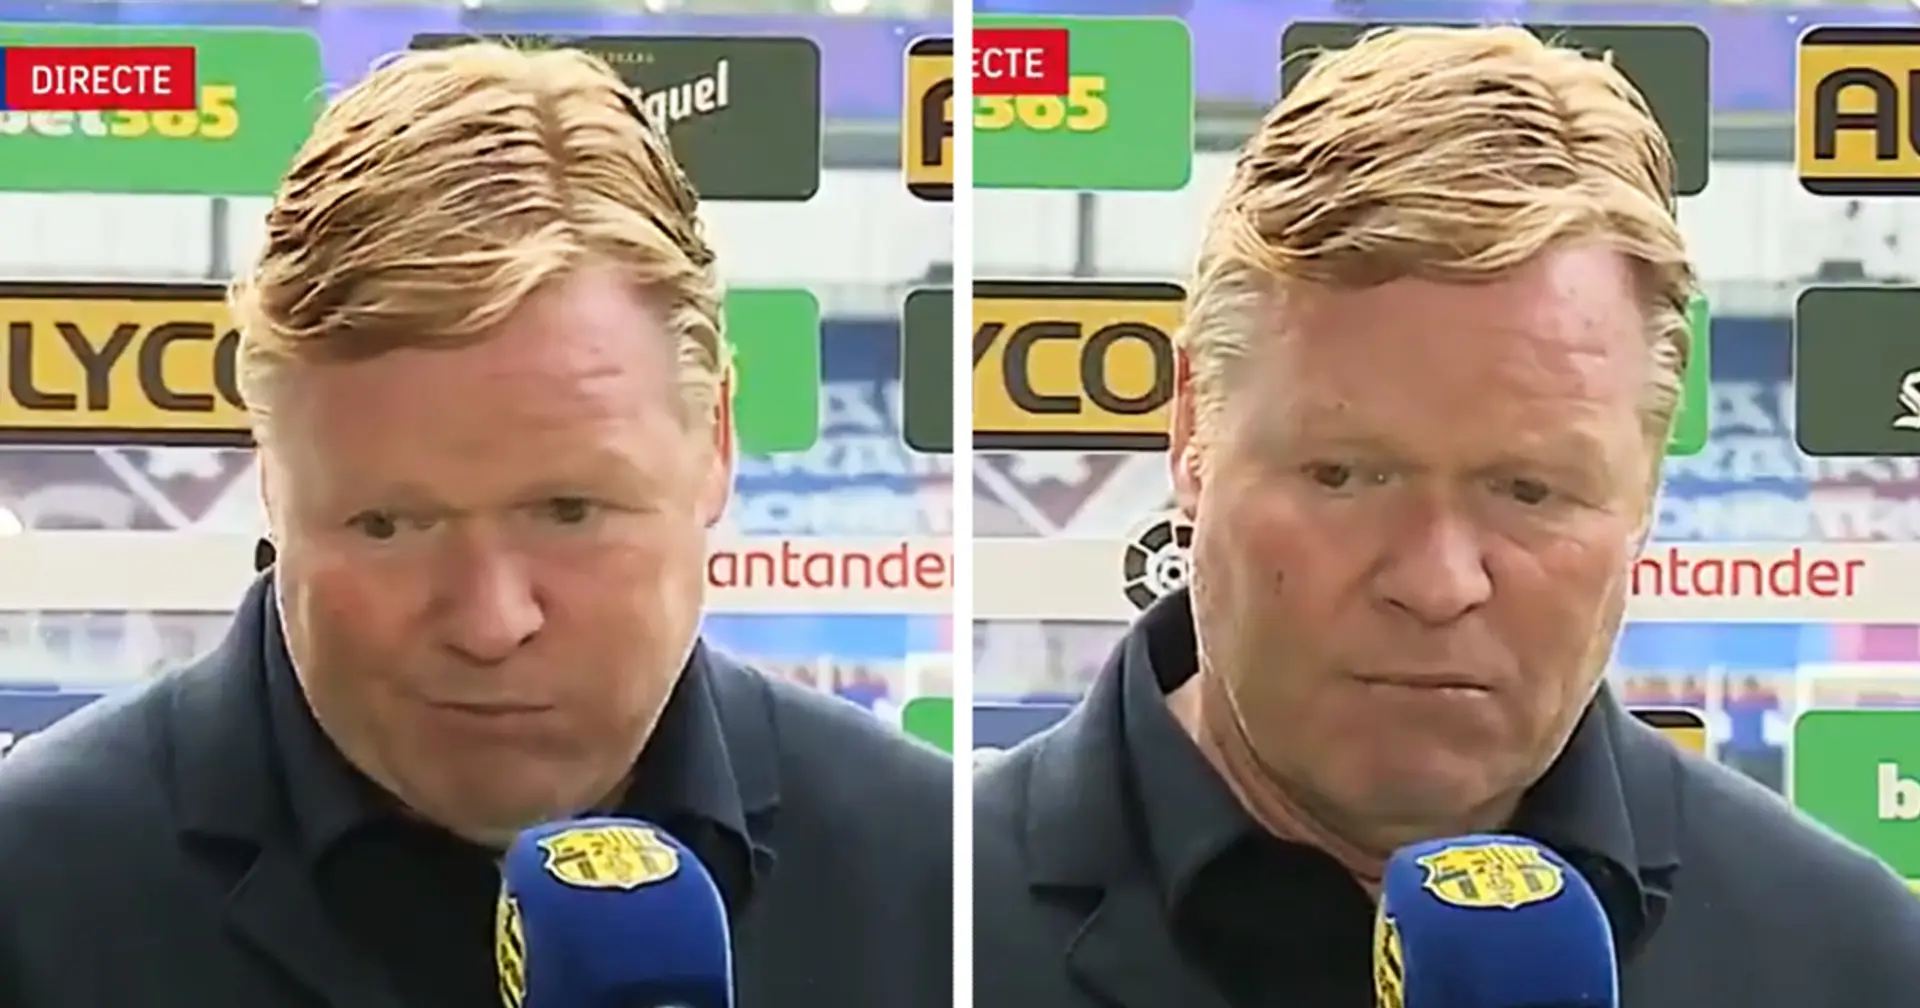 Koeman: 'This group of players doesn't have the quality to play for Barca'